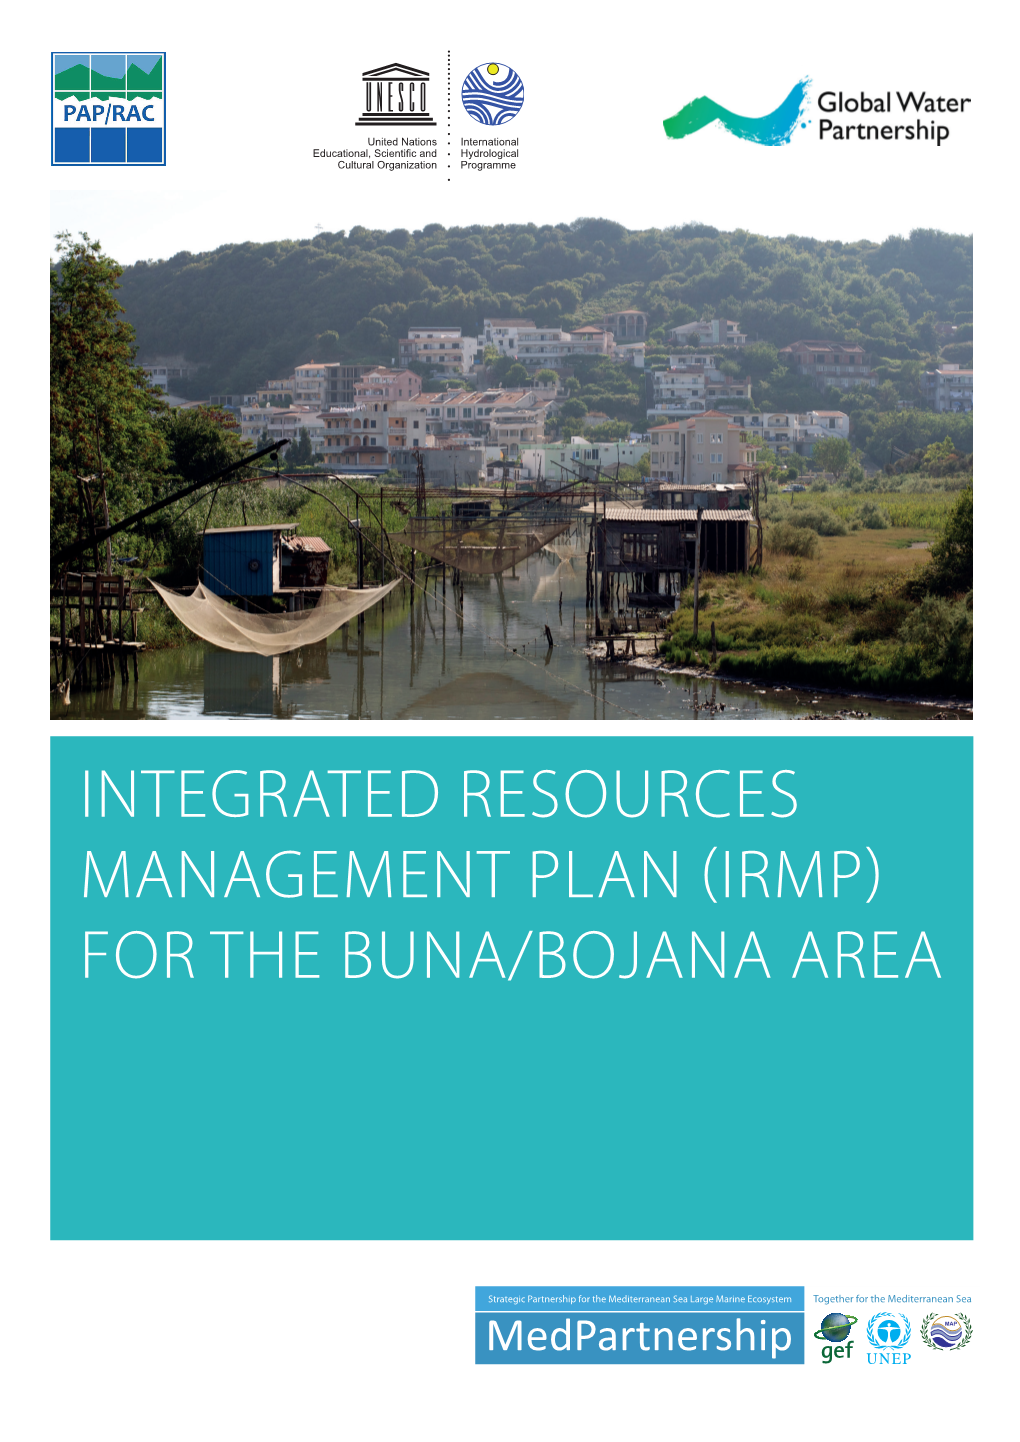 INTEGRATED RESOURCES MANAGEMENT PLAN (IRMP) for the BUNA/BOJANA AREA INTEGRATED RESOURCES (Albania and Montenegro) MANAGEMENT PLAN (IRMP)